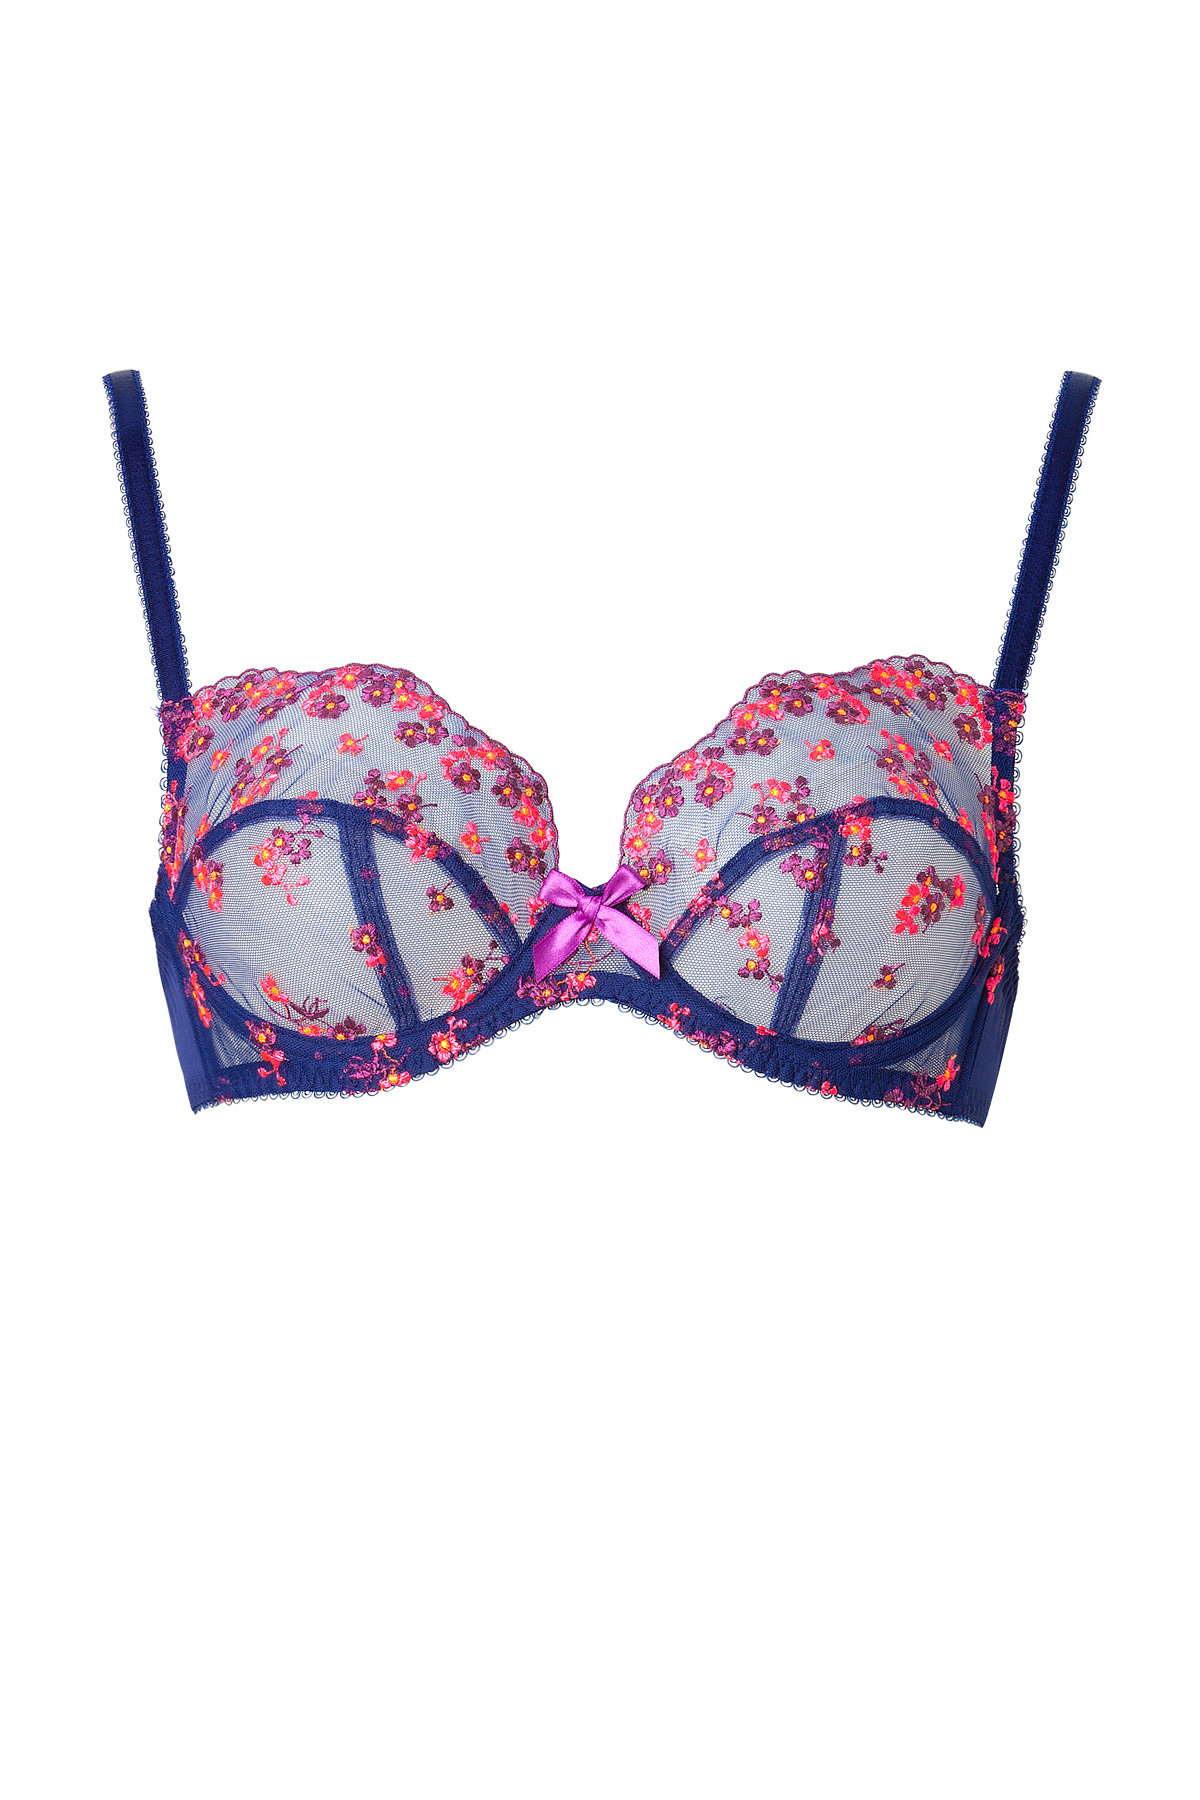 L'Agent by Agent Provocateur - Embroidered Plunge Bra in Navy/Multi